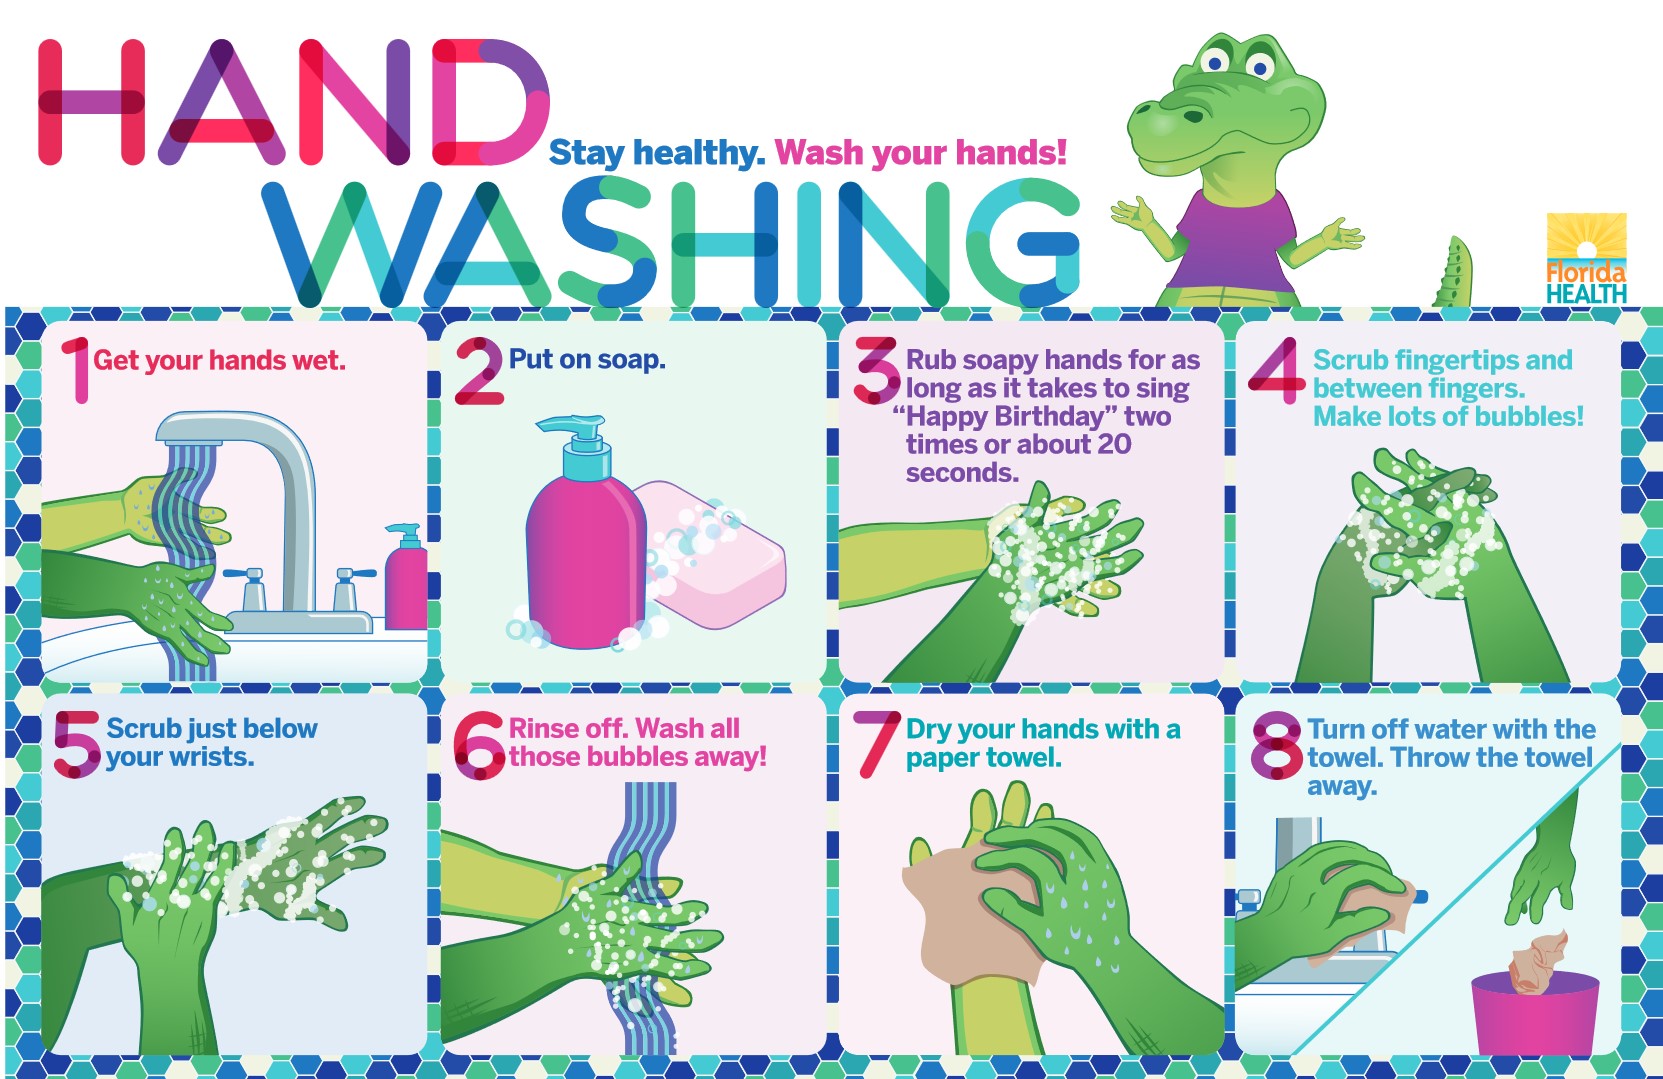 1. Get your hands wet. 2. Put on soap. 3. Rub soapy hands for as long as it takes to sing "Happy Birthday" two times or about 20 seconds. 4. Scrub fingertips and between fingers.  Make lots of bubbles! 5. Scrub just below your wrists. 6. Rinse off. Wash all those bubbles away! 7. Dry your hands with a paper towel. 8. Turn off water with the towel. Throw the towel away.